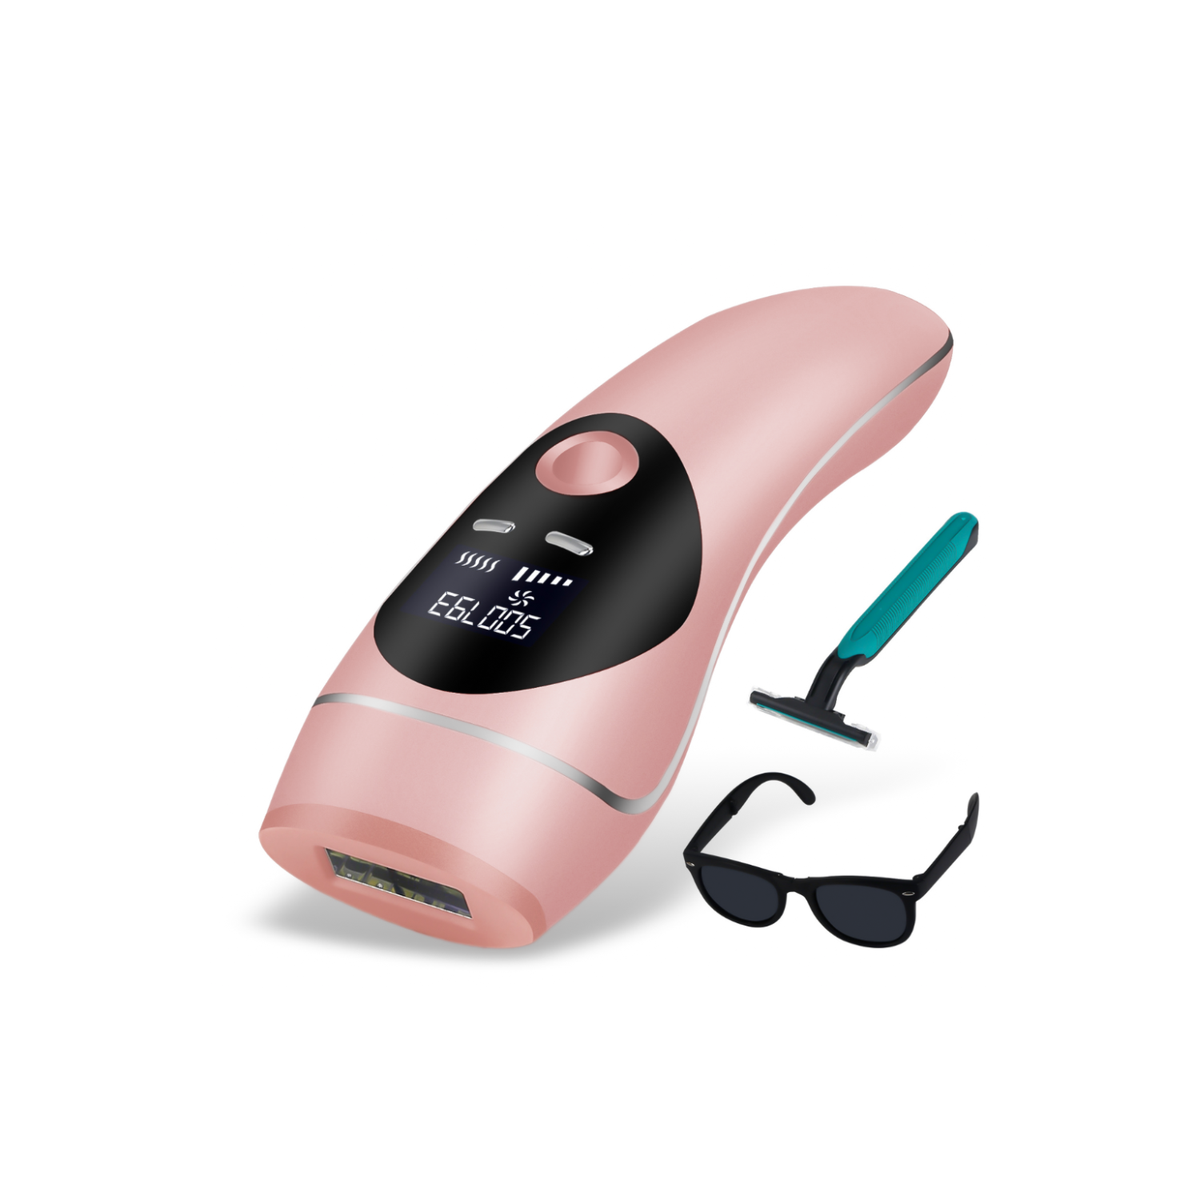 IPL Permanent Painless Laser Hair Remover Tool Epilator Body & Facial-Pink  | Buy Online in South Africa 